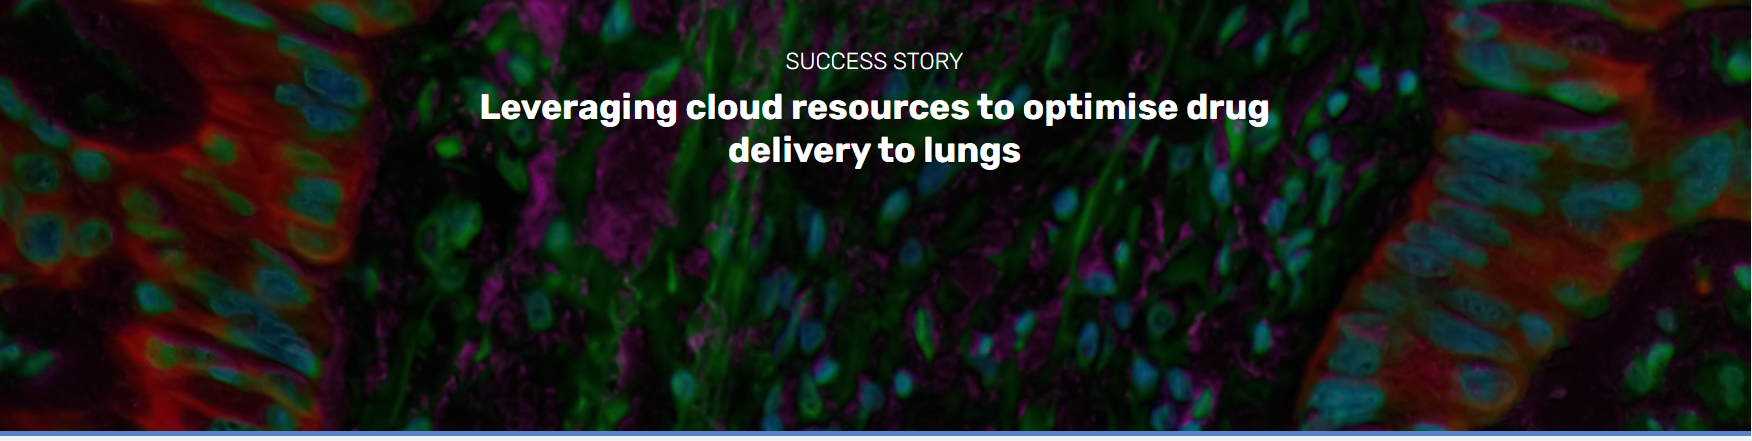 OCS-Leveraging cloud resources to optimise drug delivery to lungs